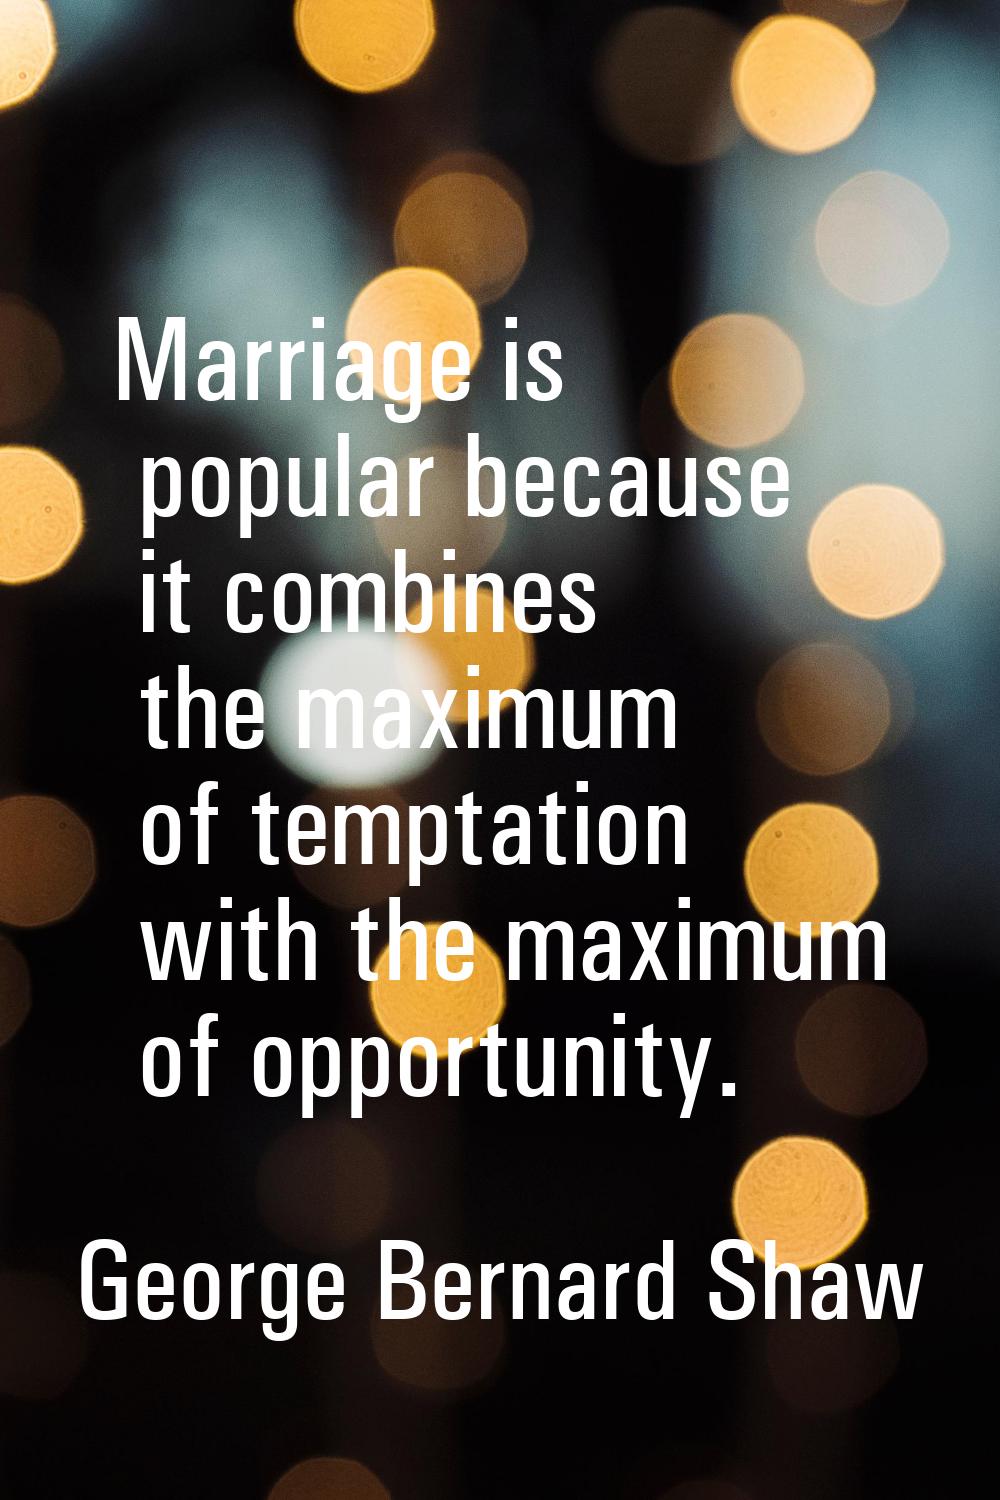 Marriage is popular because it combines the maximum of temptation with the maximum of opportunity.